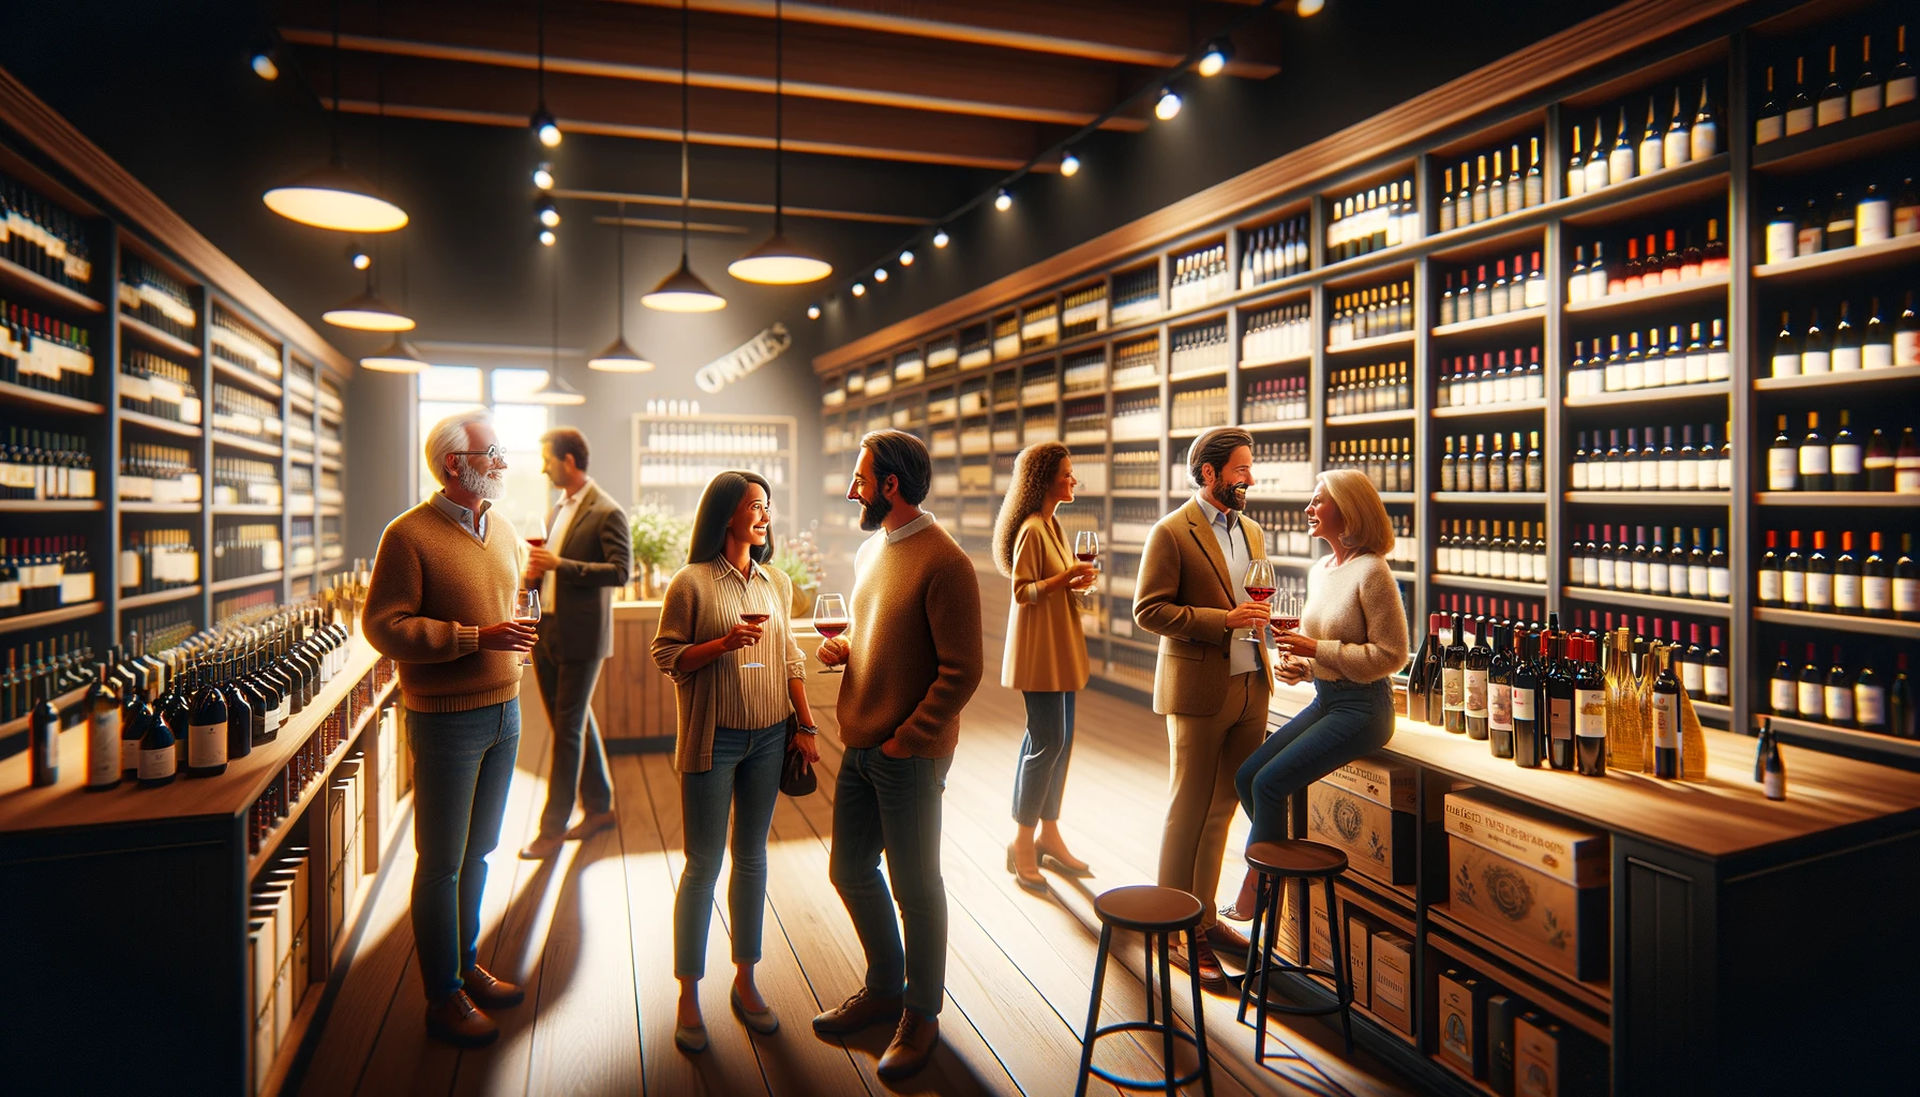 A warm, inviting scene at Total Wine & More's store, with customers happily browsing and discussing their favorite wine selections, capturing the essence of community and passion for wine.